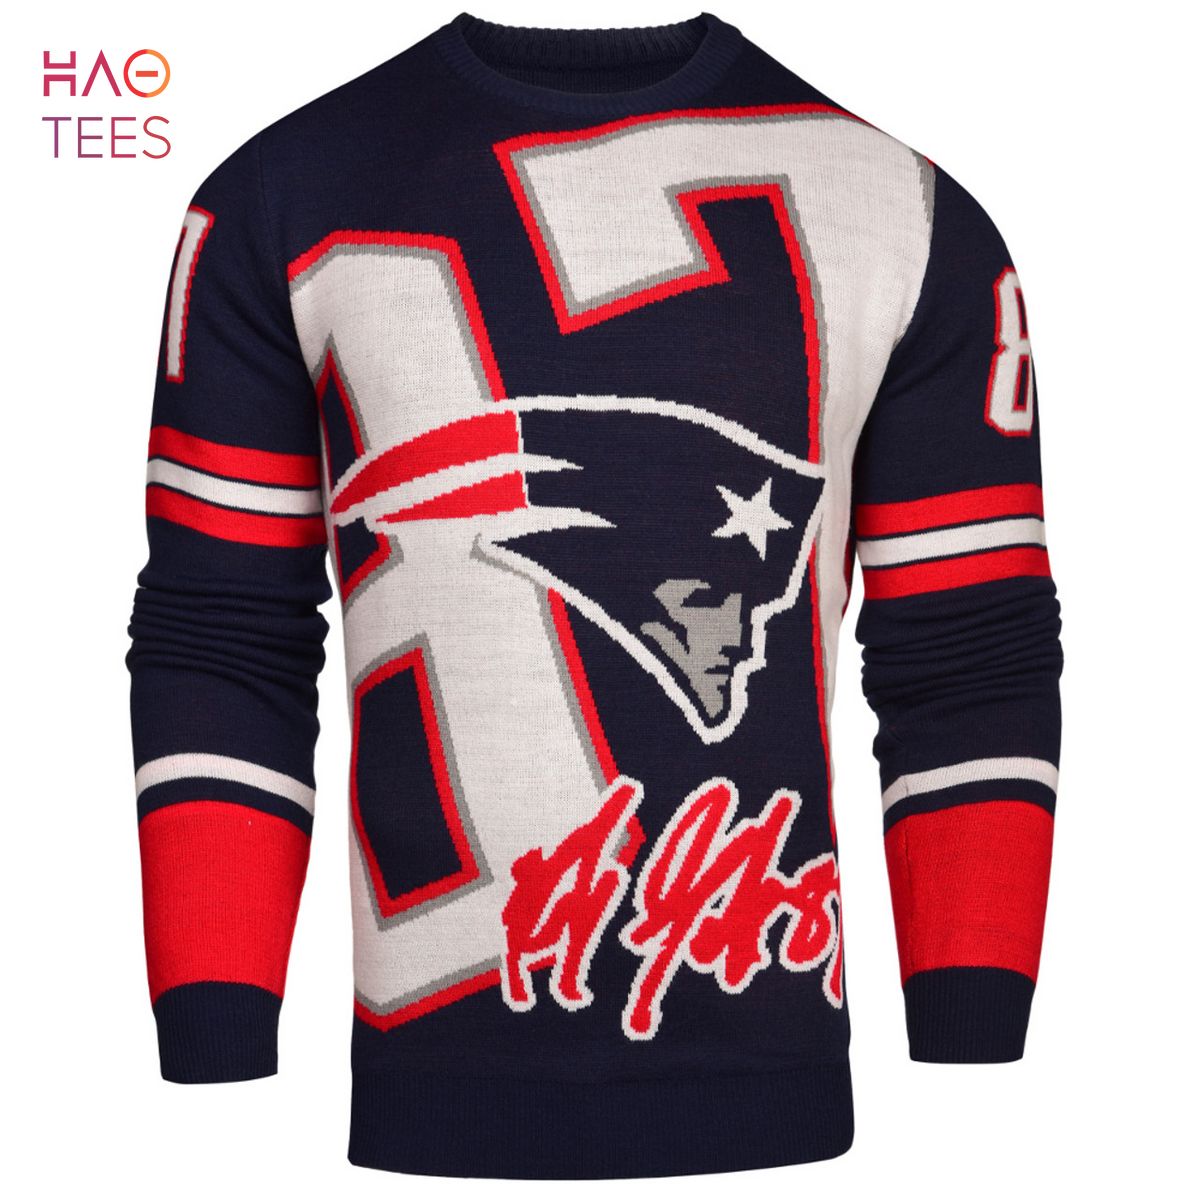 BEST Rob Gronkowski 87 New England Patriots NFL Loud Player Sweater By Forever Collectibles